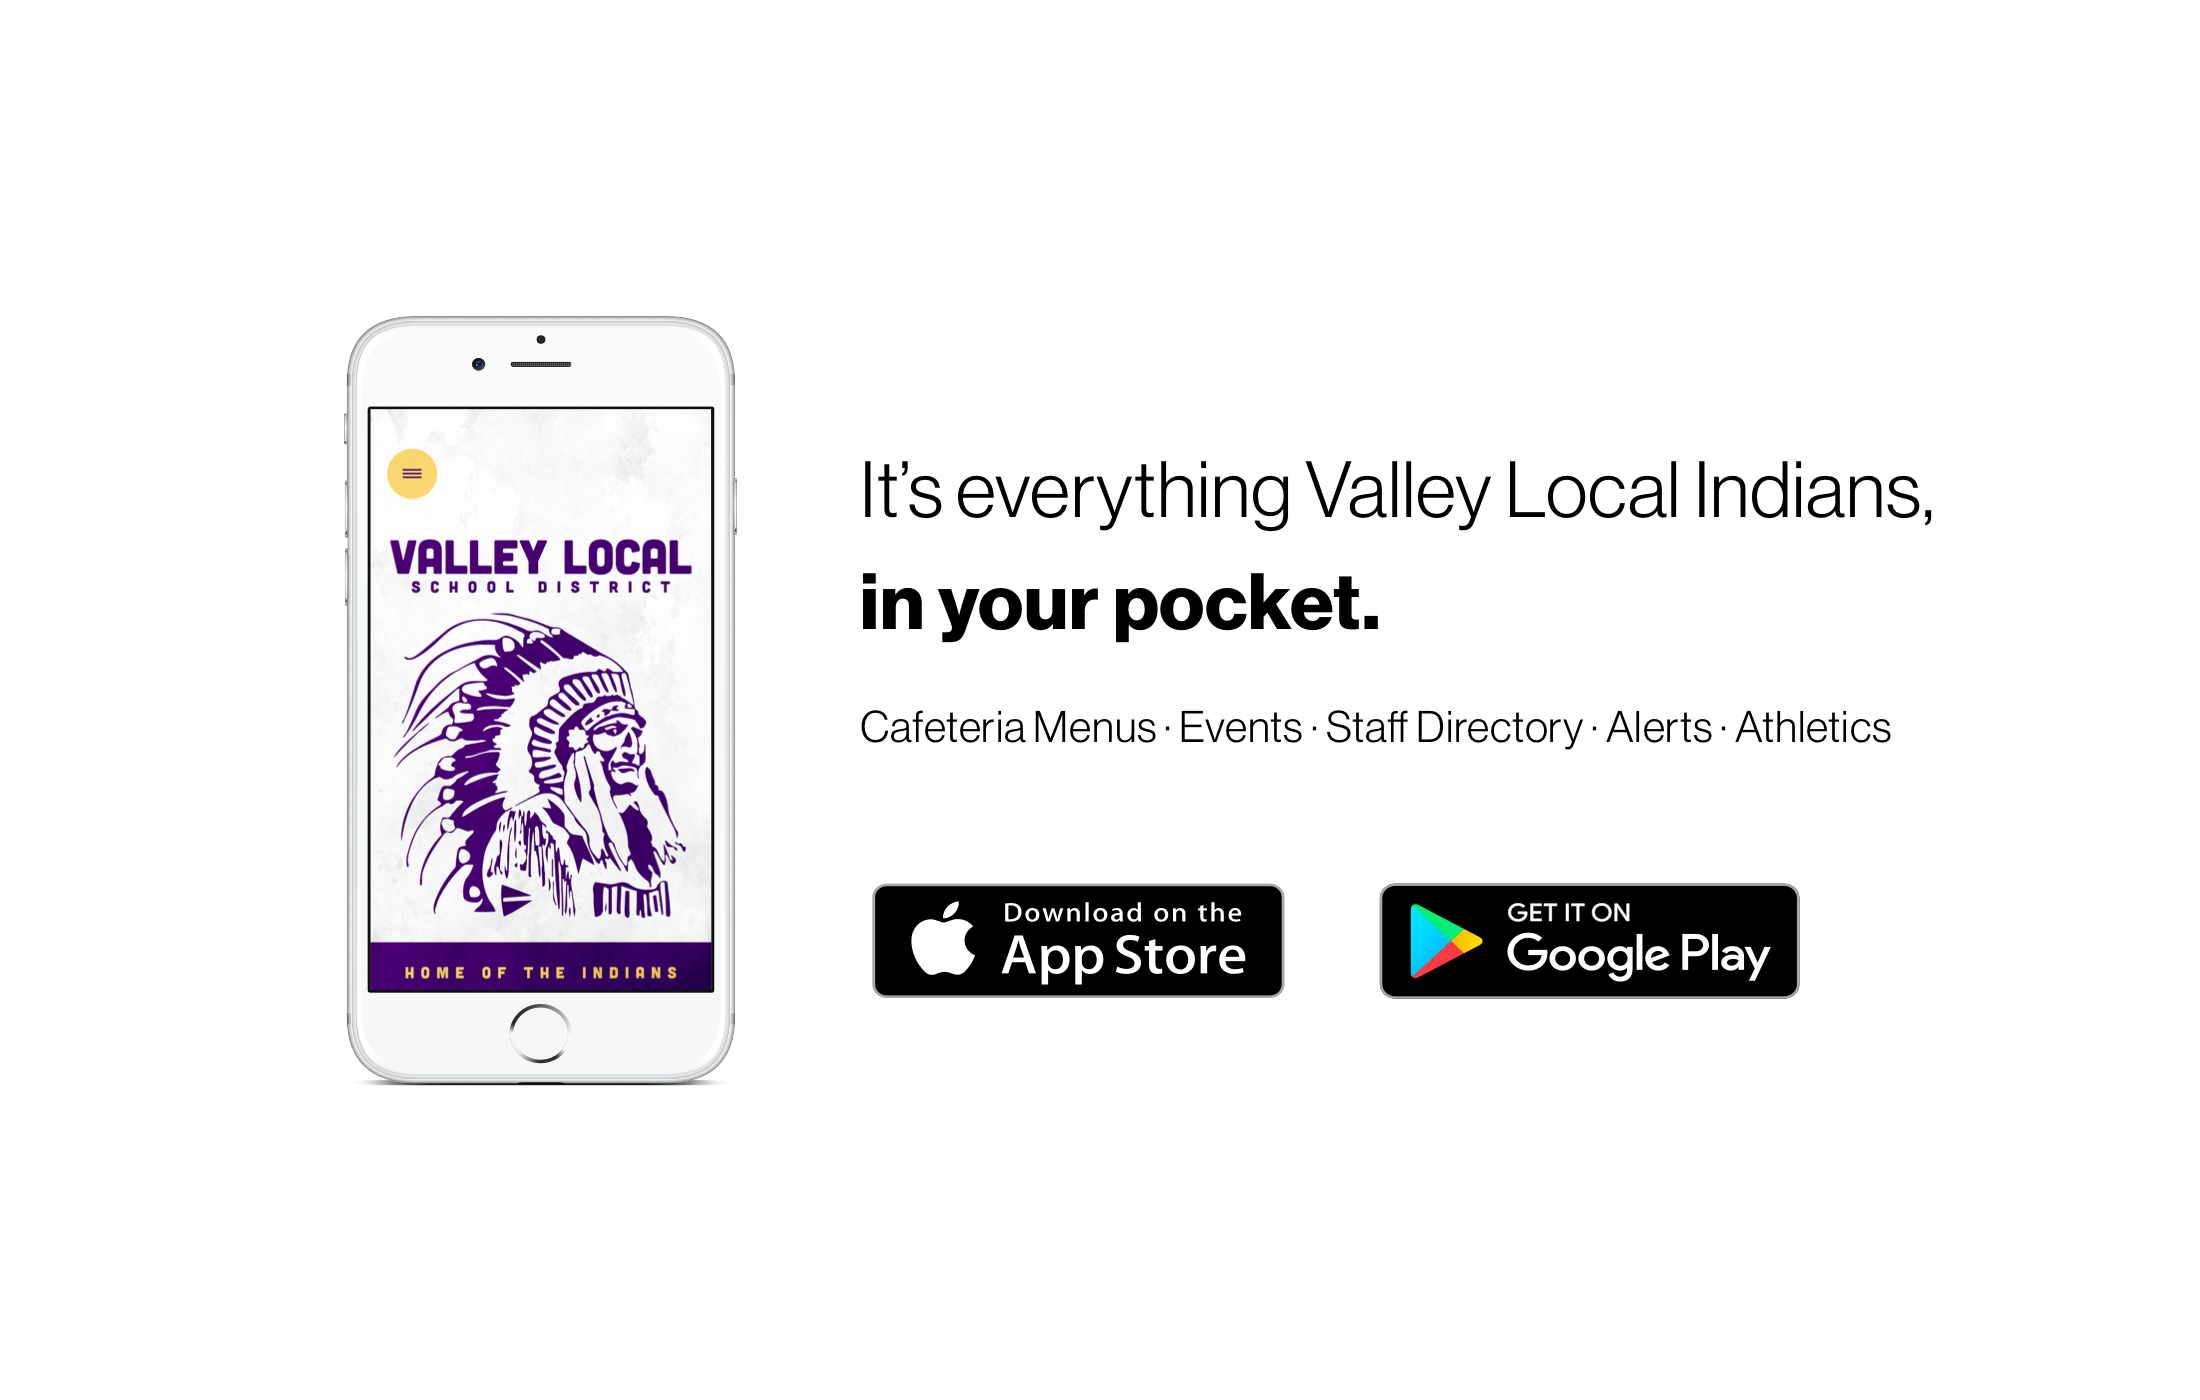 It's everything Valley Local Indians, in your pocket!